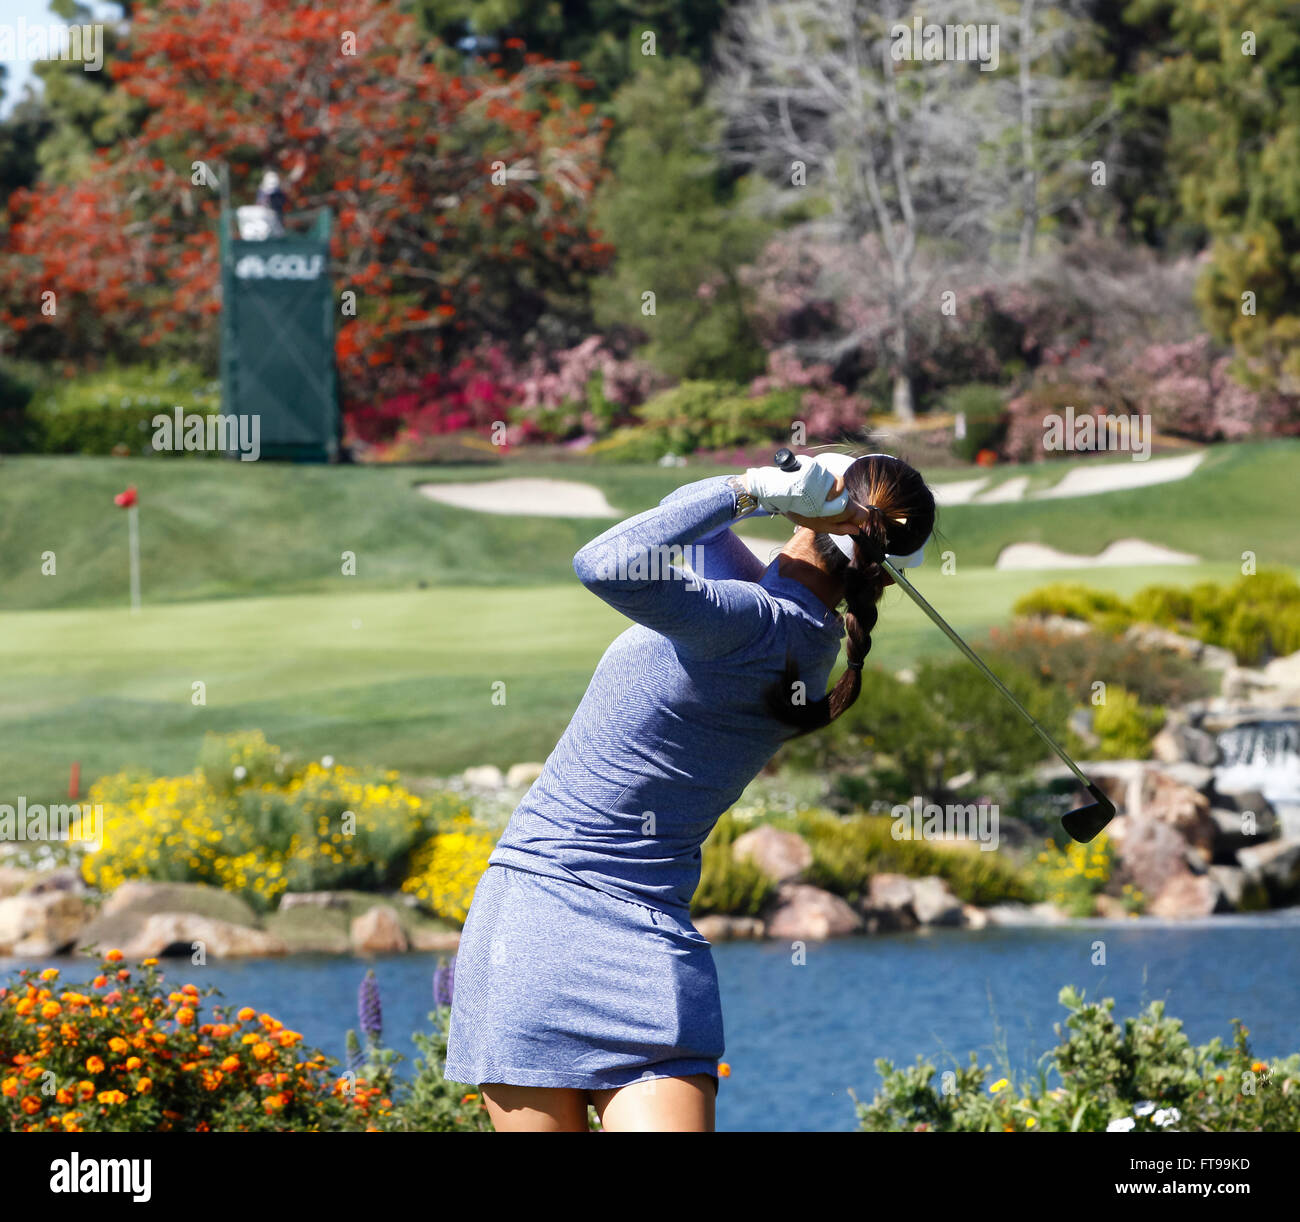 Carlsbad, California, USA. 25th Mar, 2016. Michelle Wie on the 11th hole during the second round of the Kia Classic at Aviara Golf Club in Carlsbad, California. Justin Cooper/CSM/Alamy Live News Stock Photo